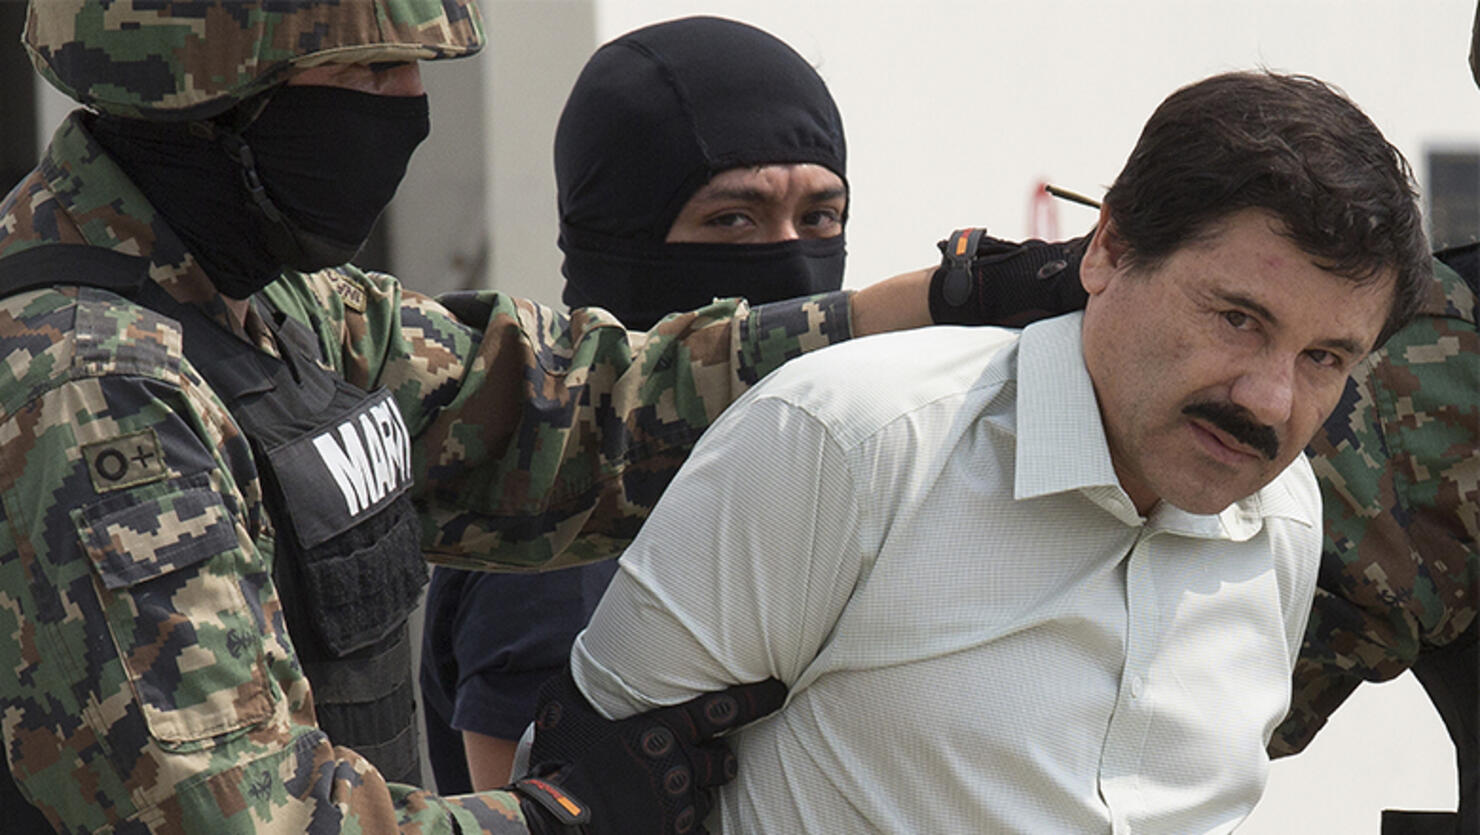 Drug trafficker Joaquin 'El Chapo' Guzman is escorted to a helicopter by Mexican security forces 